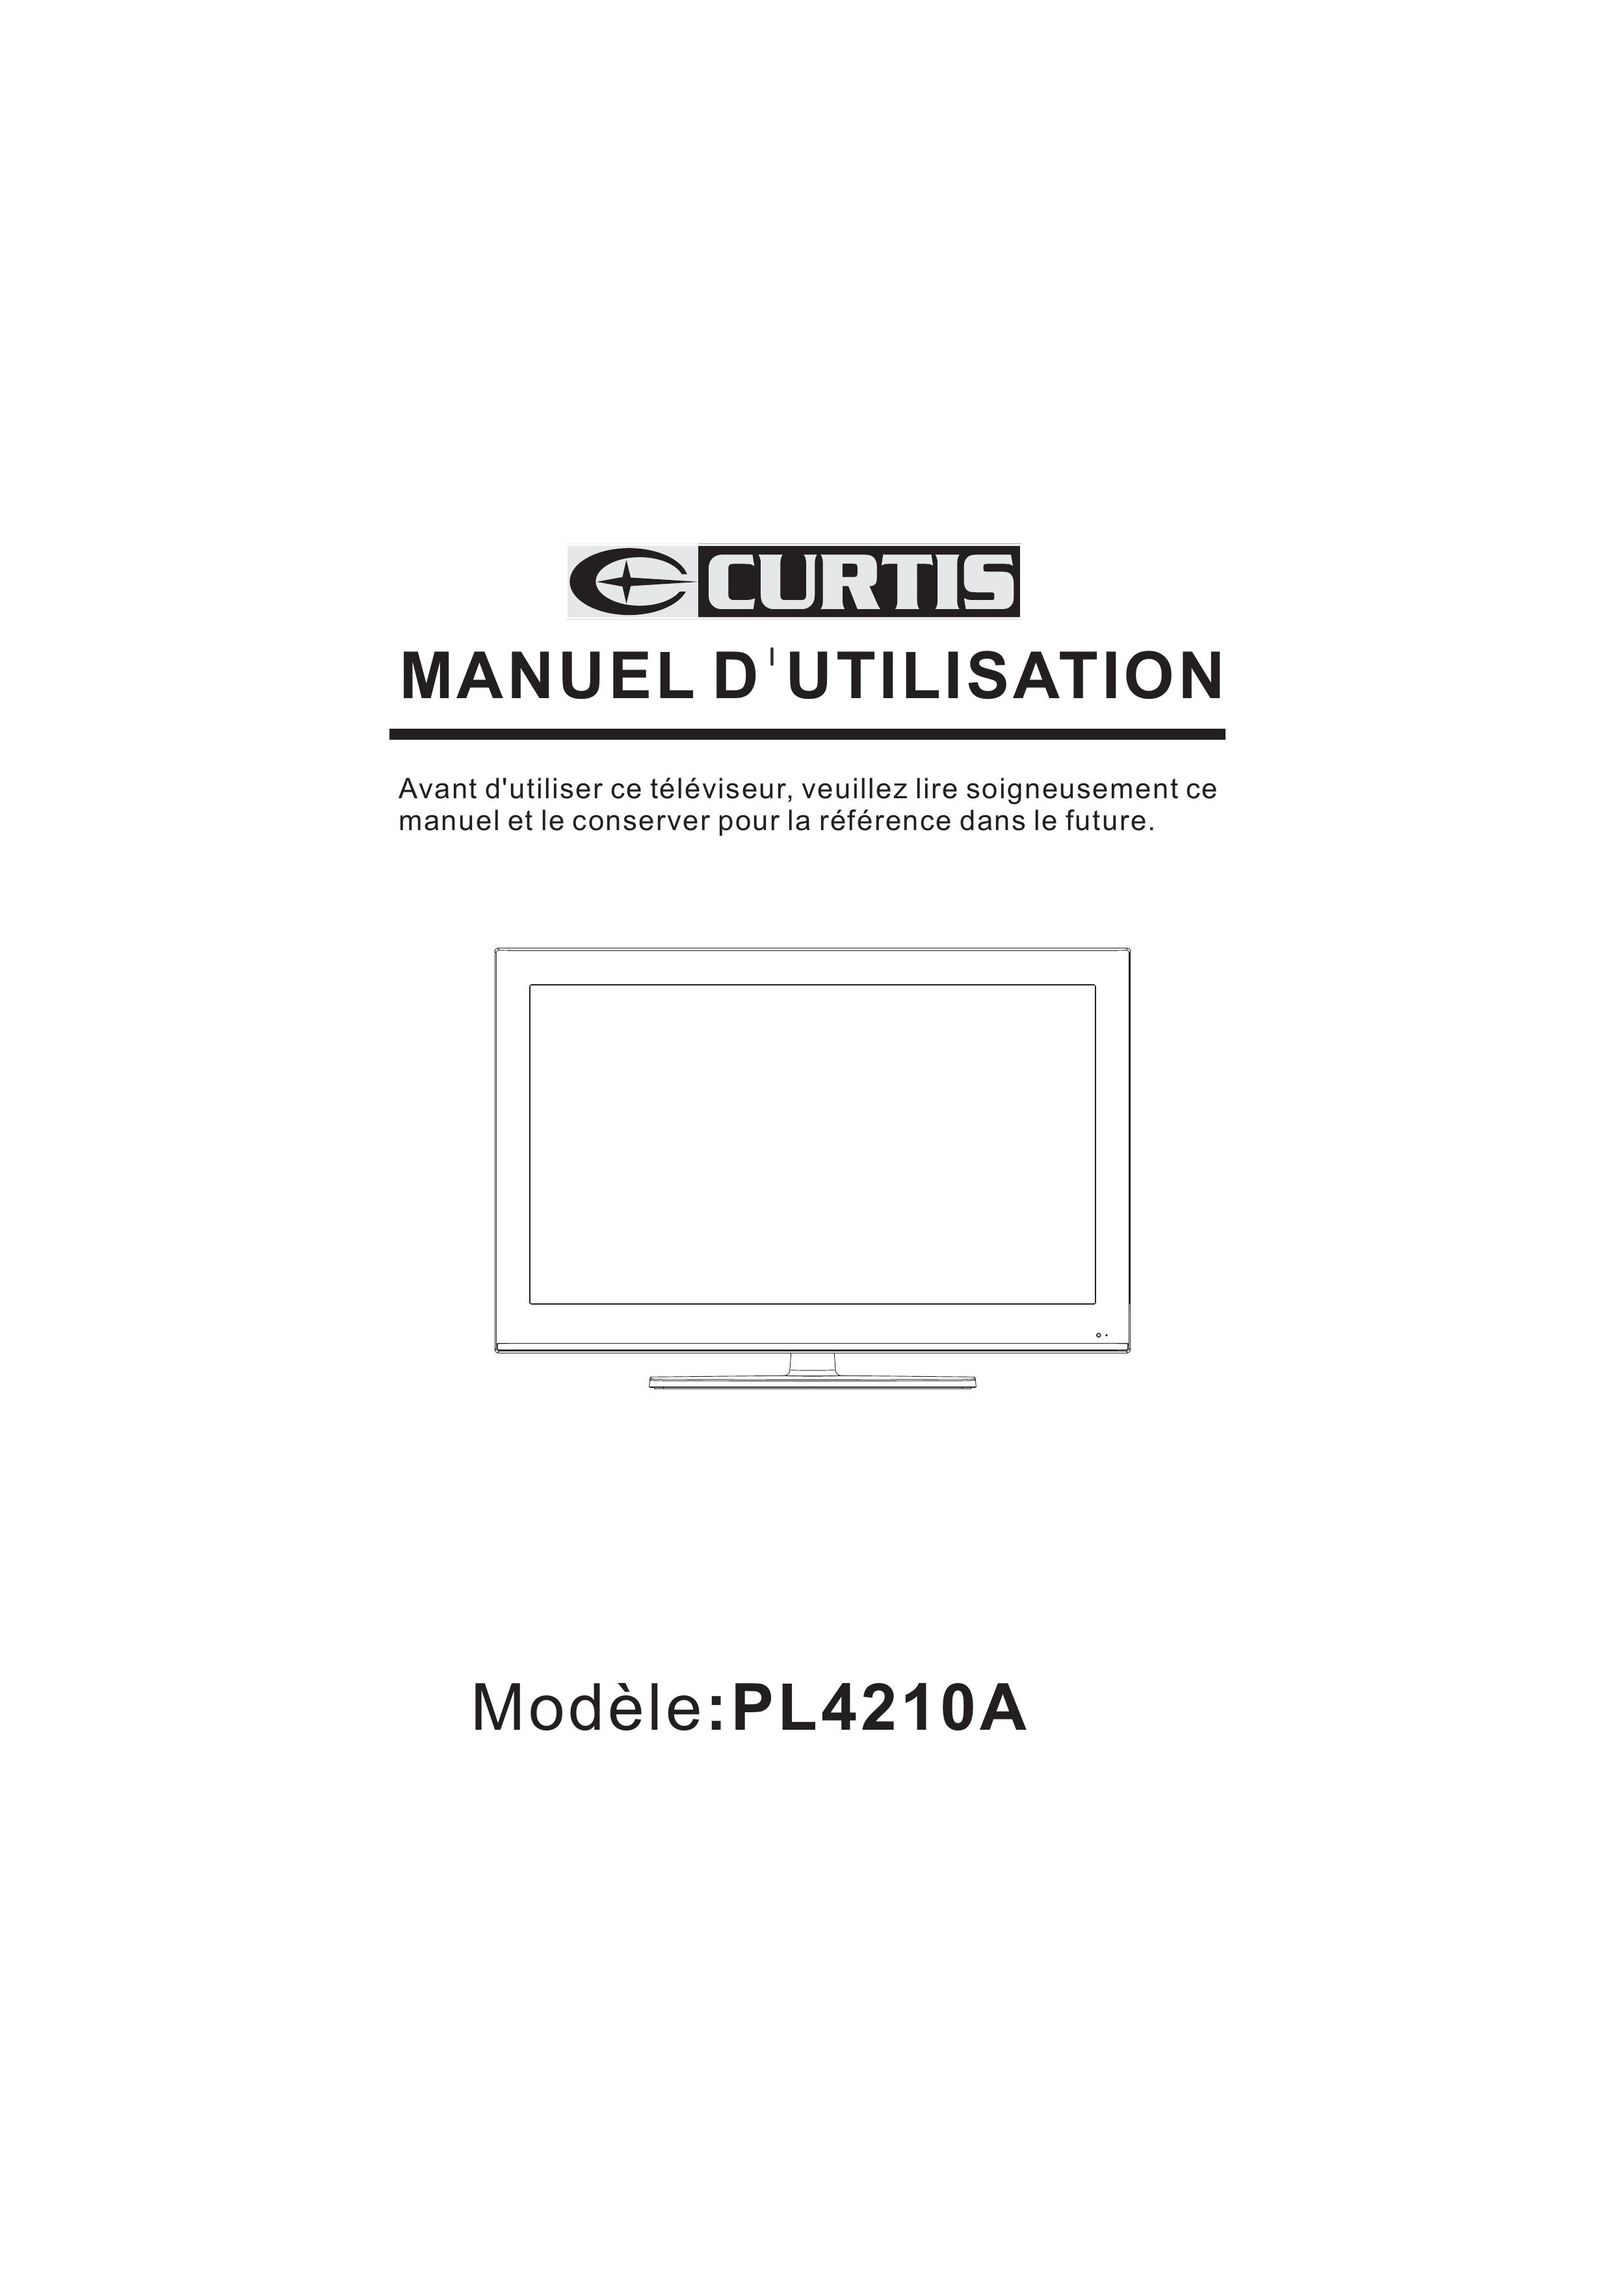 Curtis PL4210A Flat Panel Television User Manual